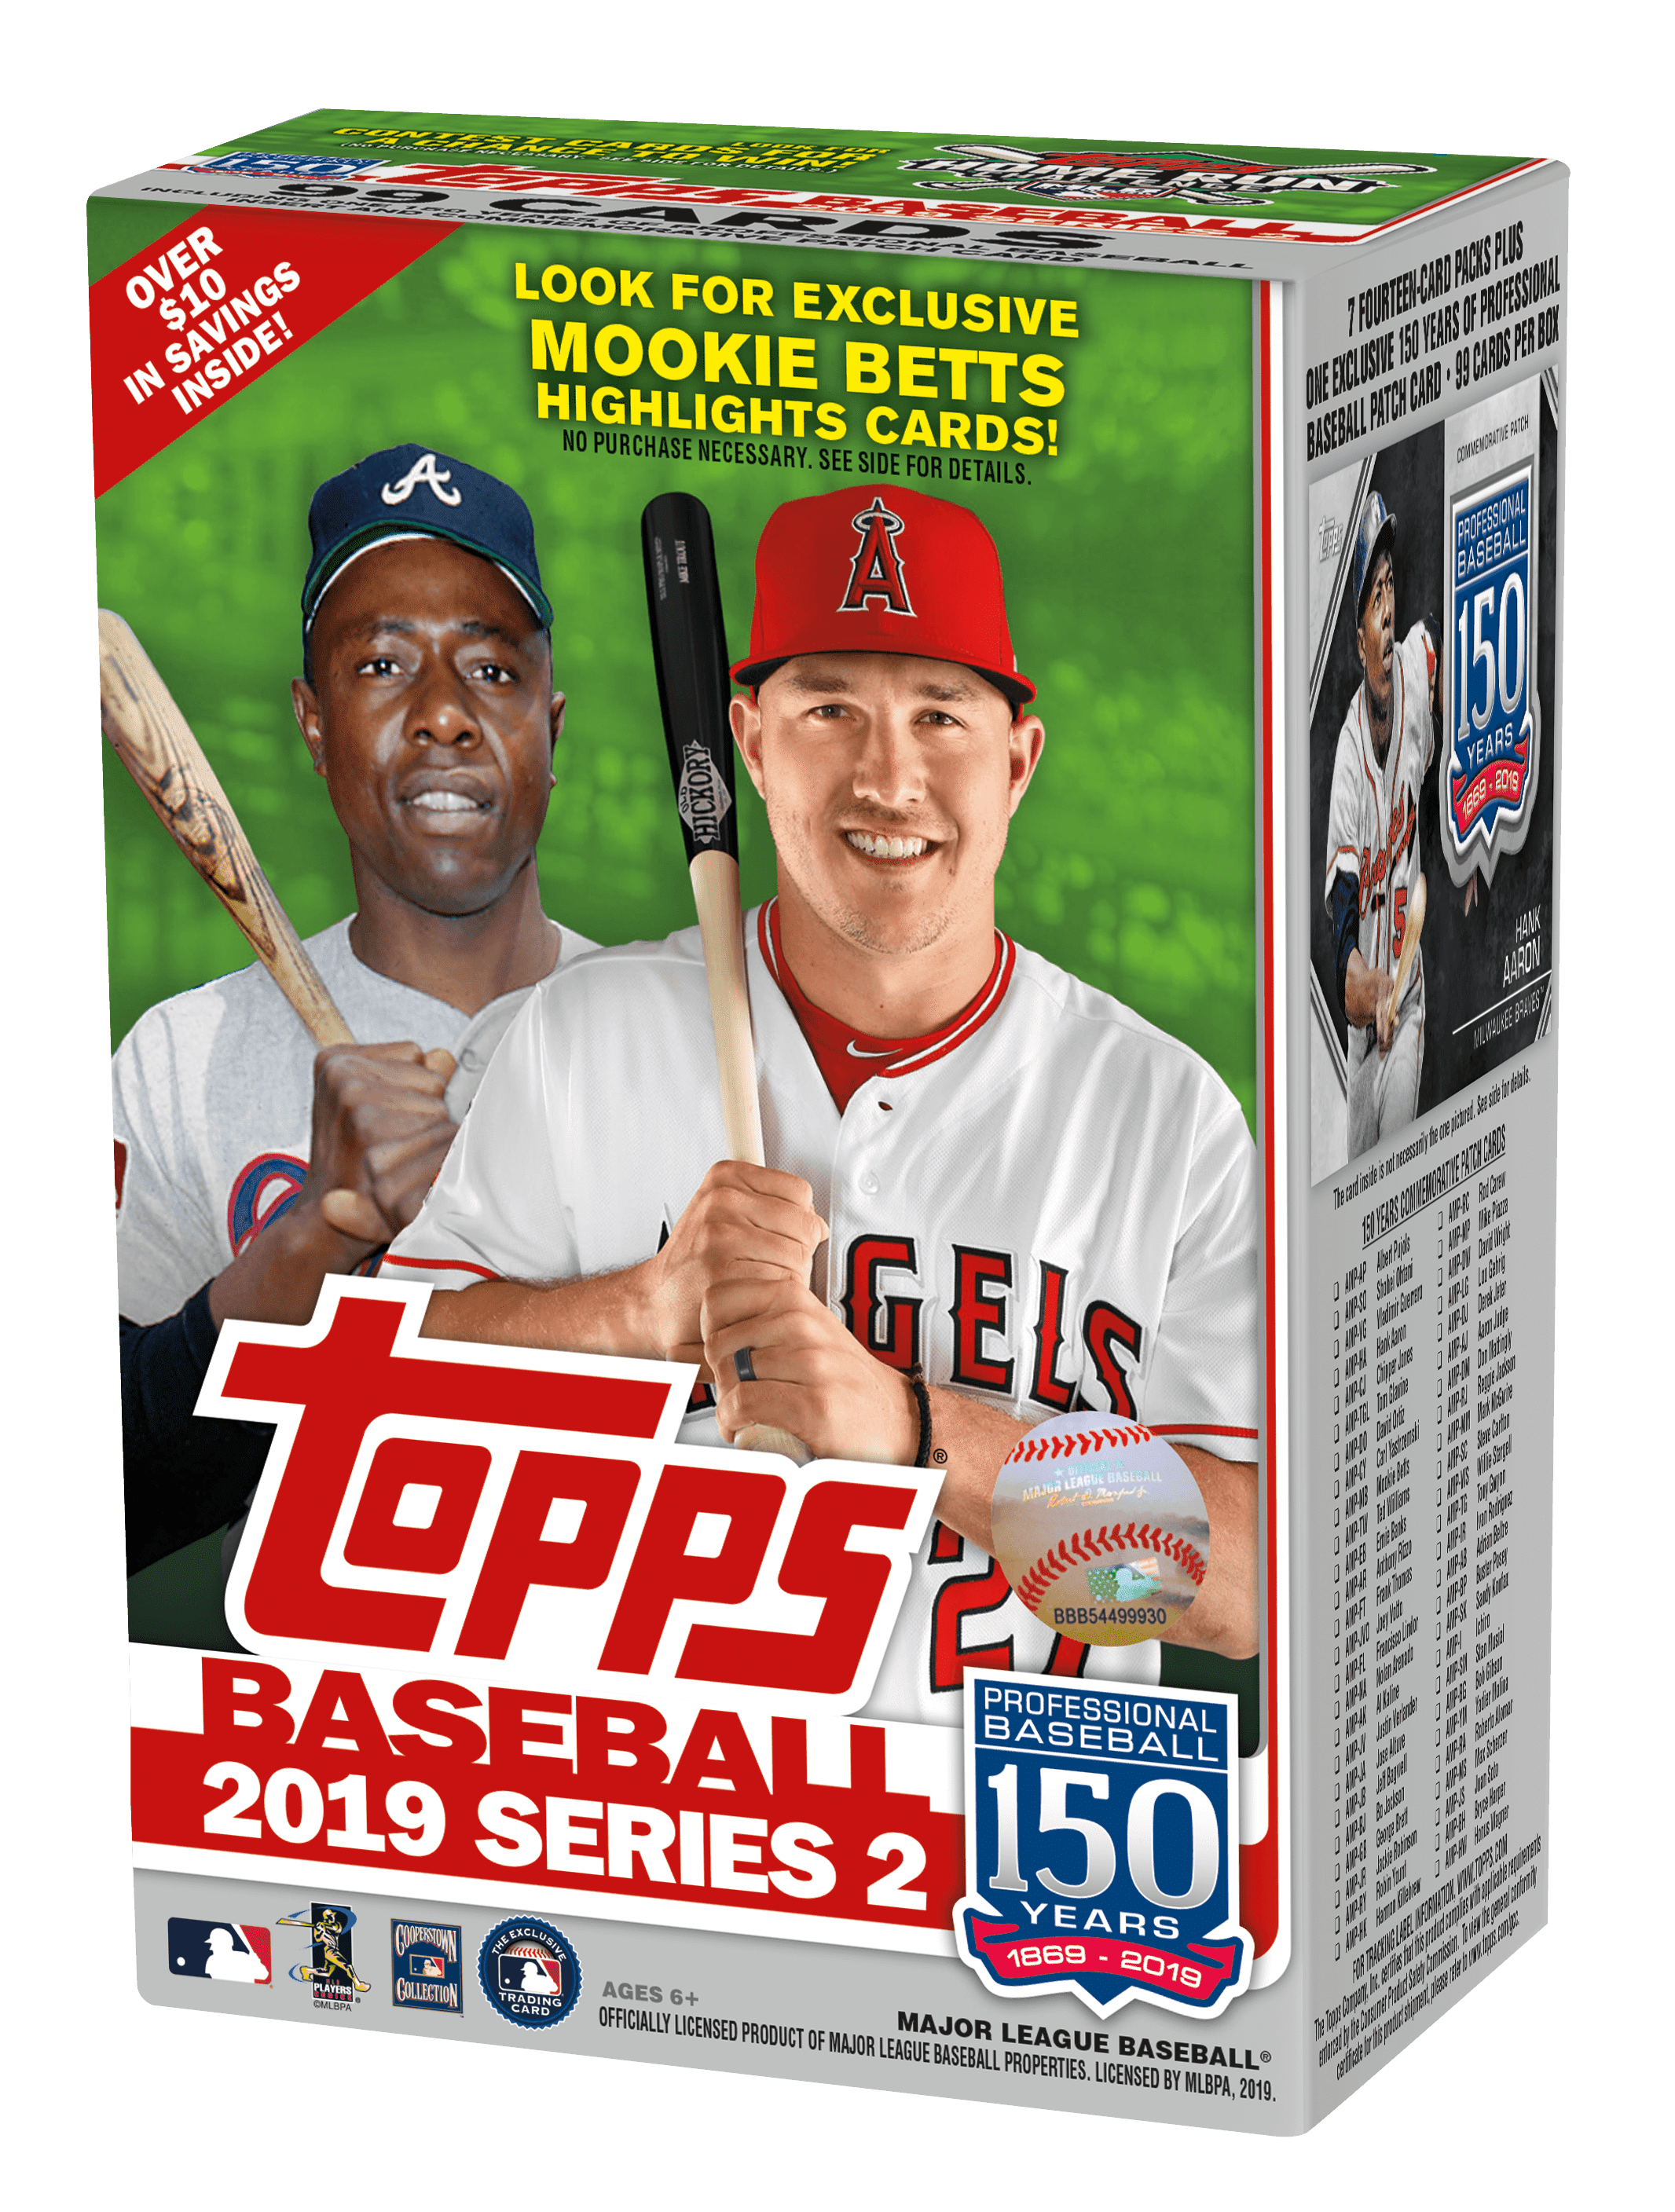 Aaron Judge,Derek Jeter & More Look for Autographs of SHOEHEI OHTANI 2018 Donruss Baseball EXCLUSIVE 20 Box Factory Sealed Blaster CASE with SPECIAL HOLO BLUE & CRYSTAL PARALLELS WOWZZER!